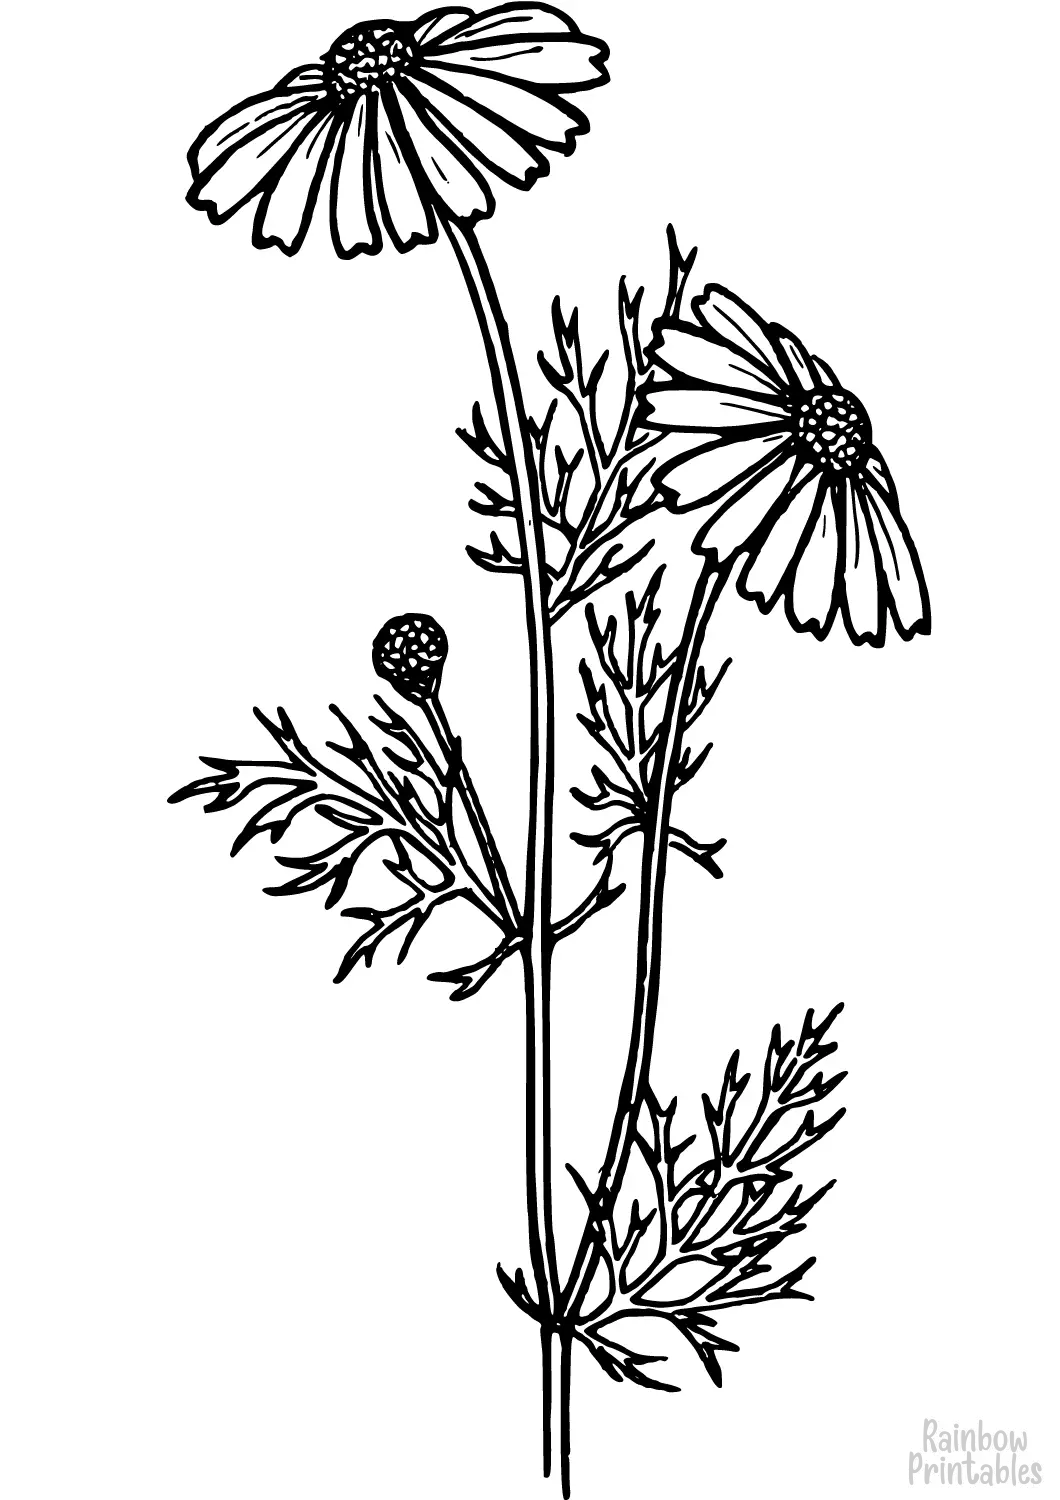 SIMPLE-EASY-line-drawings-DAISY-FLOWER-coloring-page-for-kids Outline